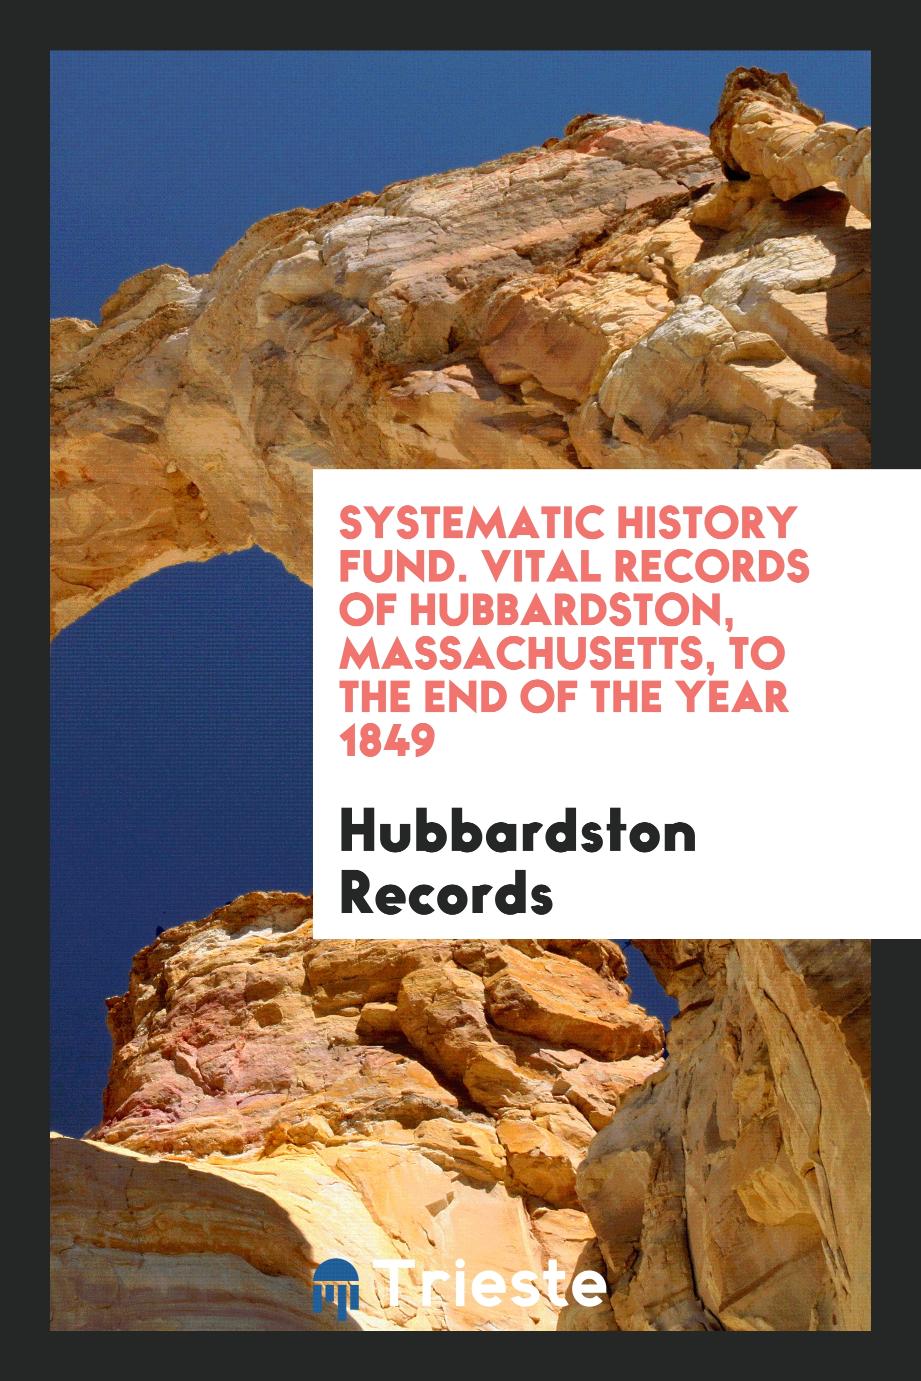 Systematic History Fund. Vital Records of Hubbardston, Massachusetts, to the End of the Year 1849